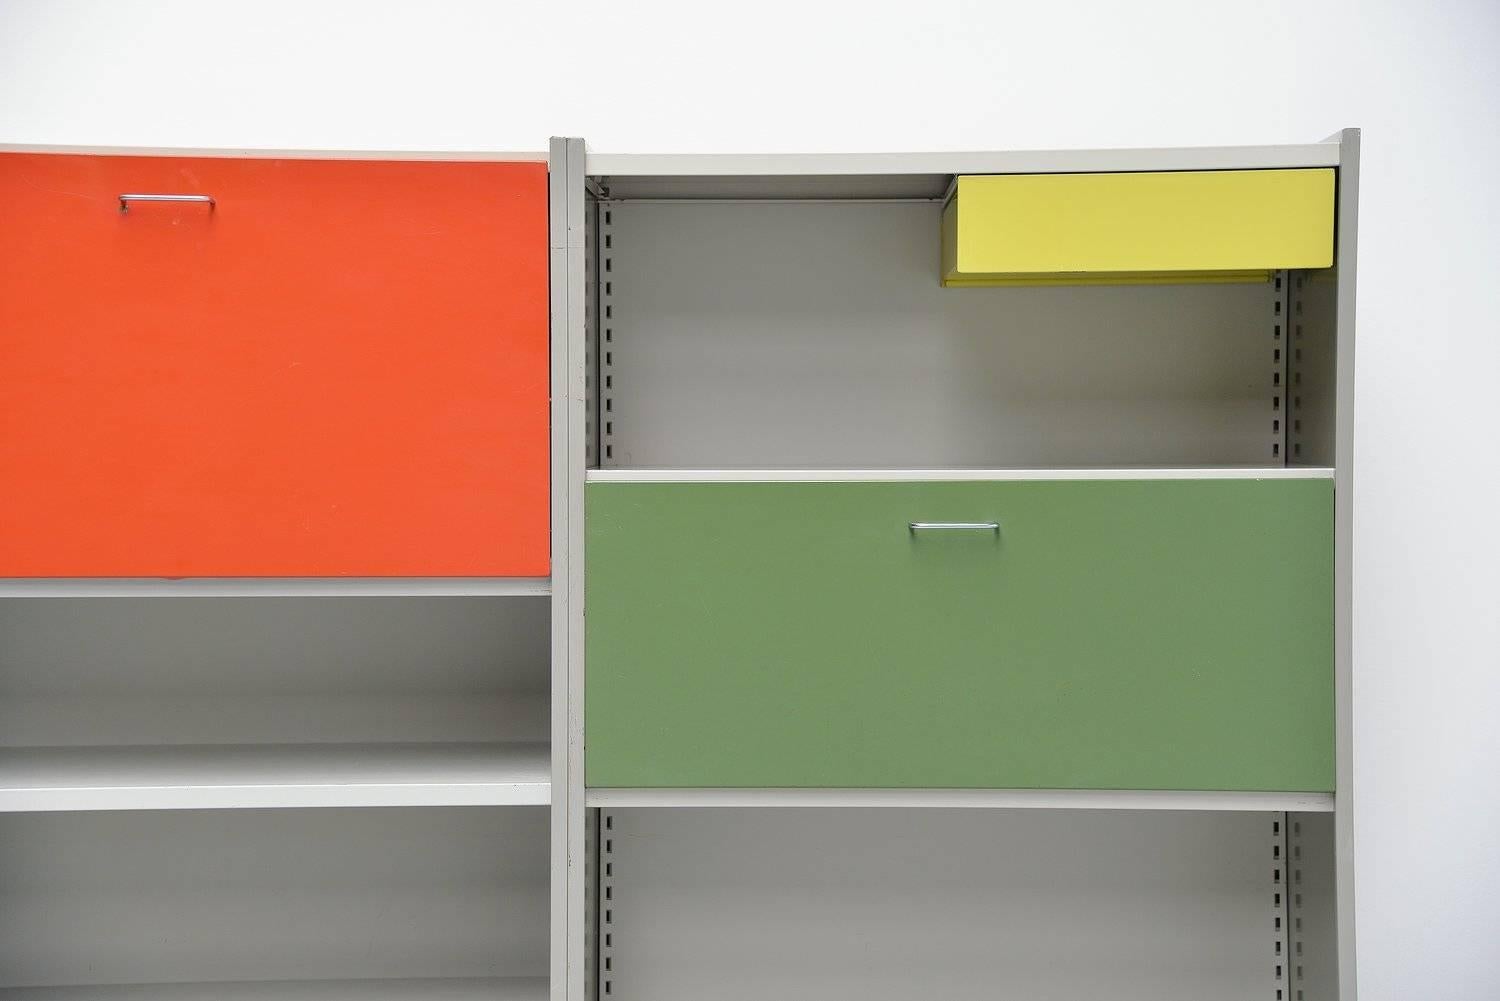 Very nice and large storage unit designed by Andre Cordemeijer for Gispen Culemborg, Holland 1962. This amazing storage unit was designed for multi purposes, offices, home, stores. Because it was made to build in all sorts of options, its a modular